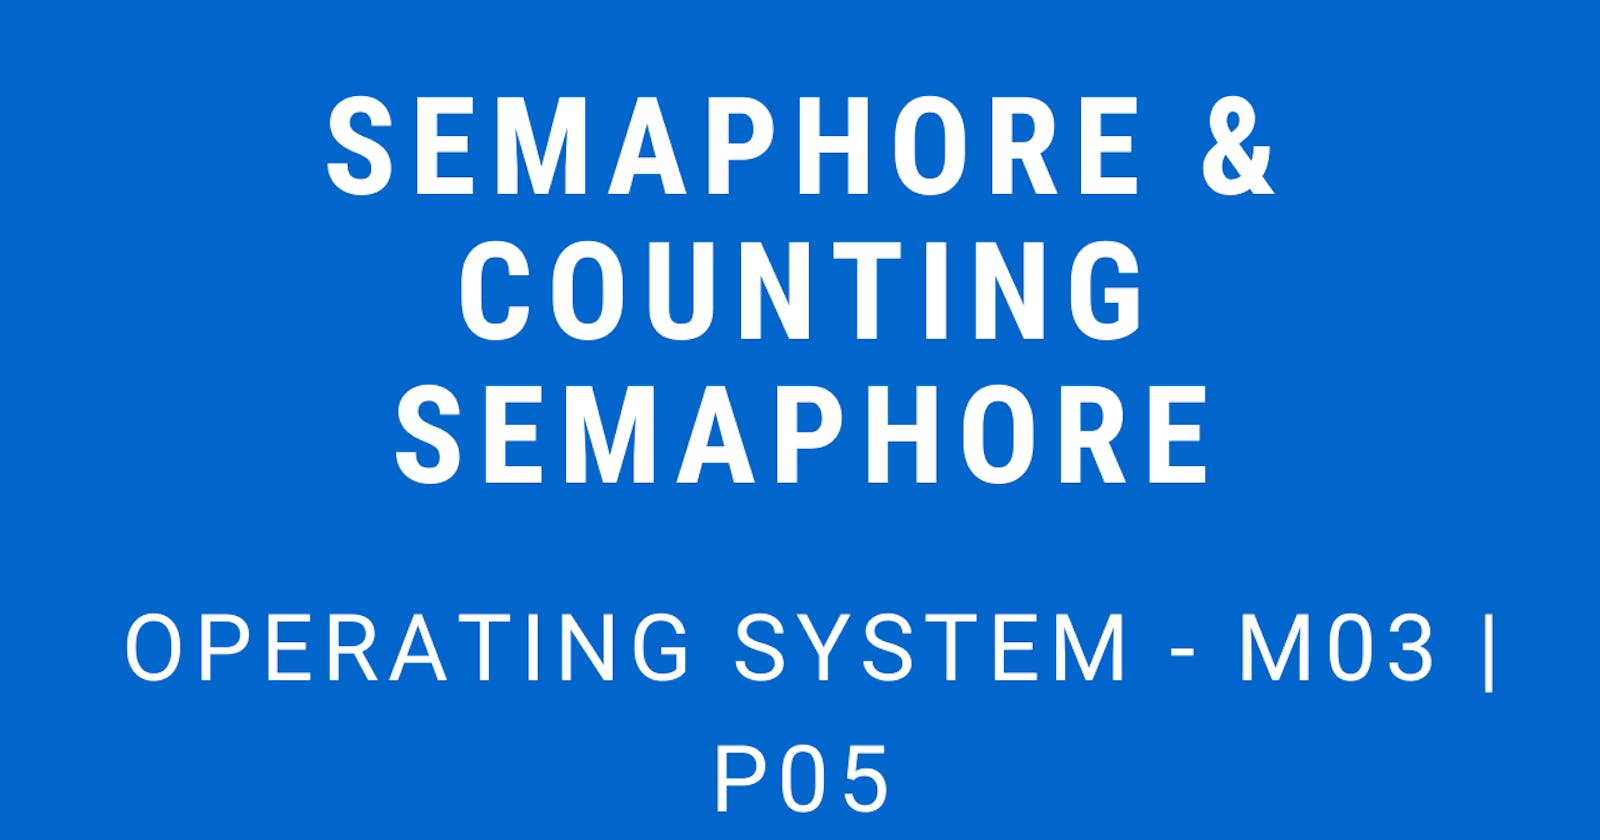 Semaphores and Counting Semaphores | Operating System - M03 P05